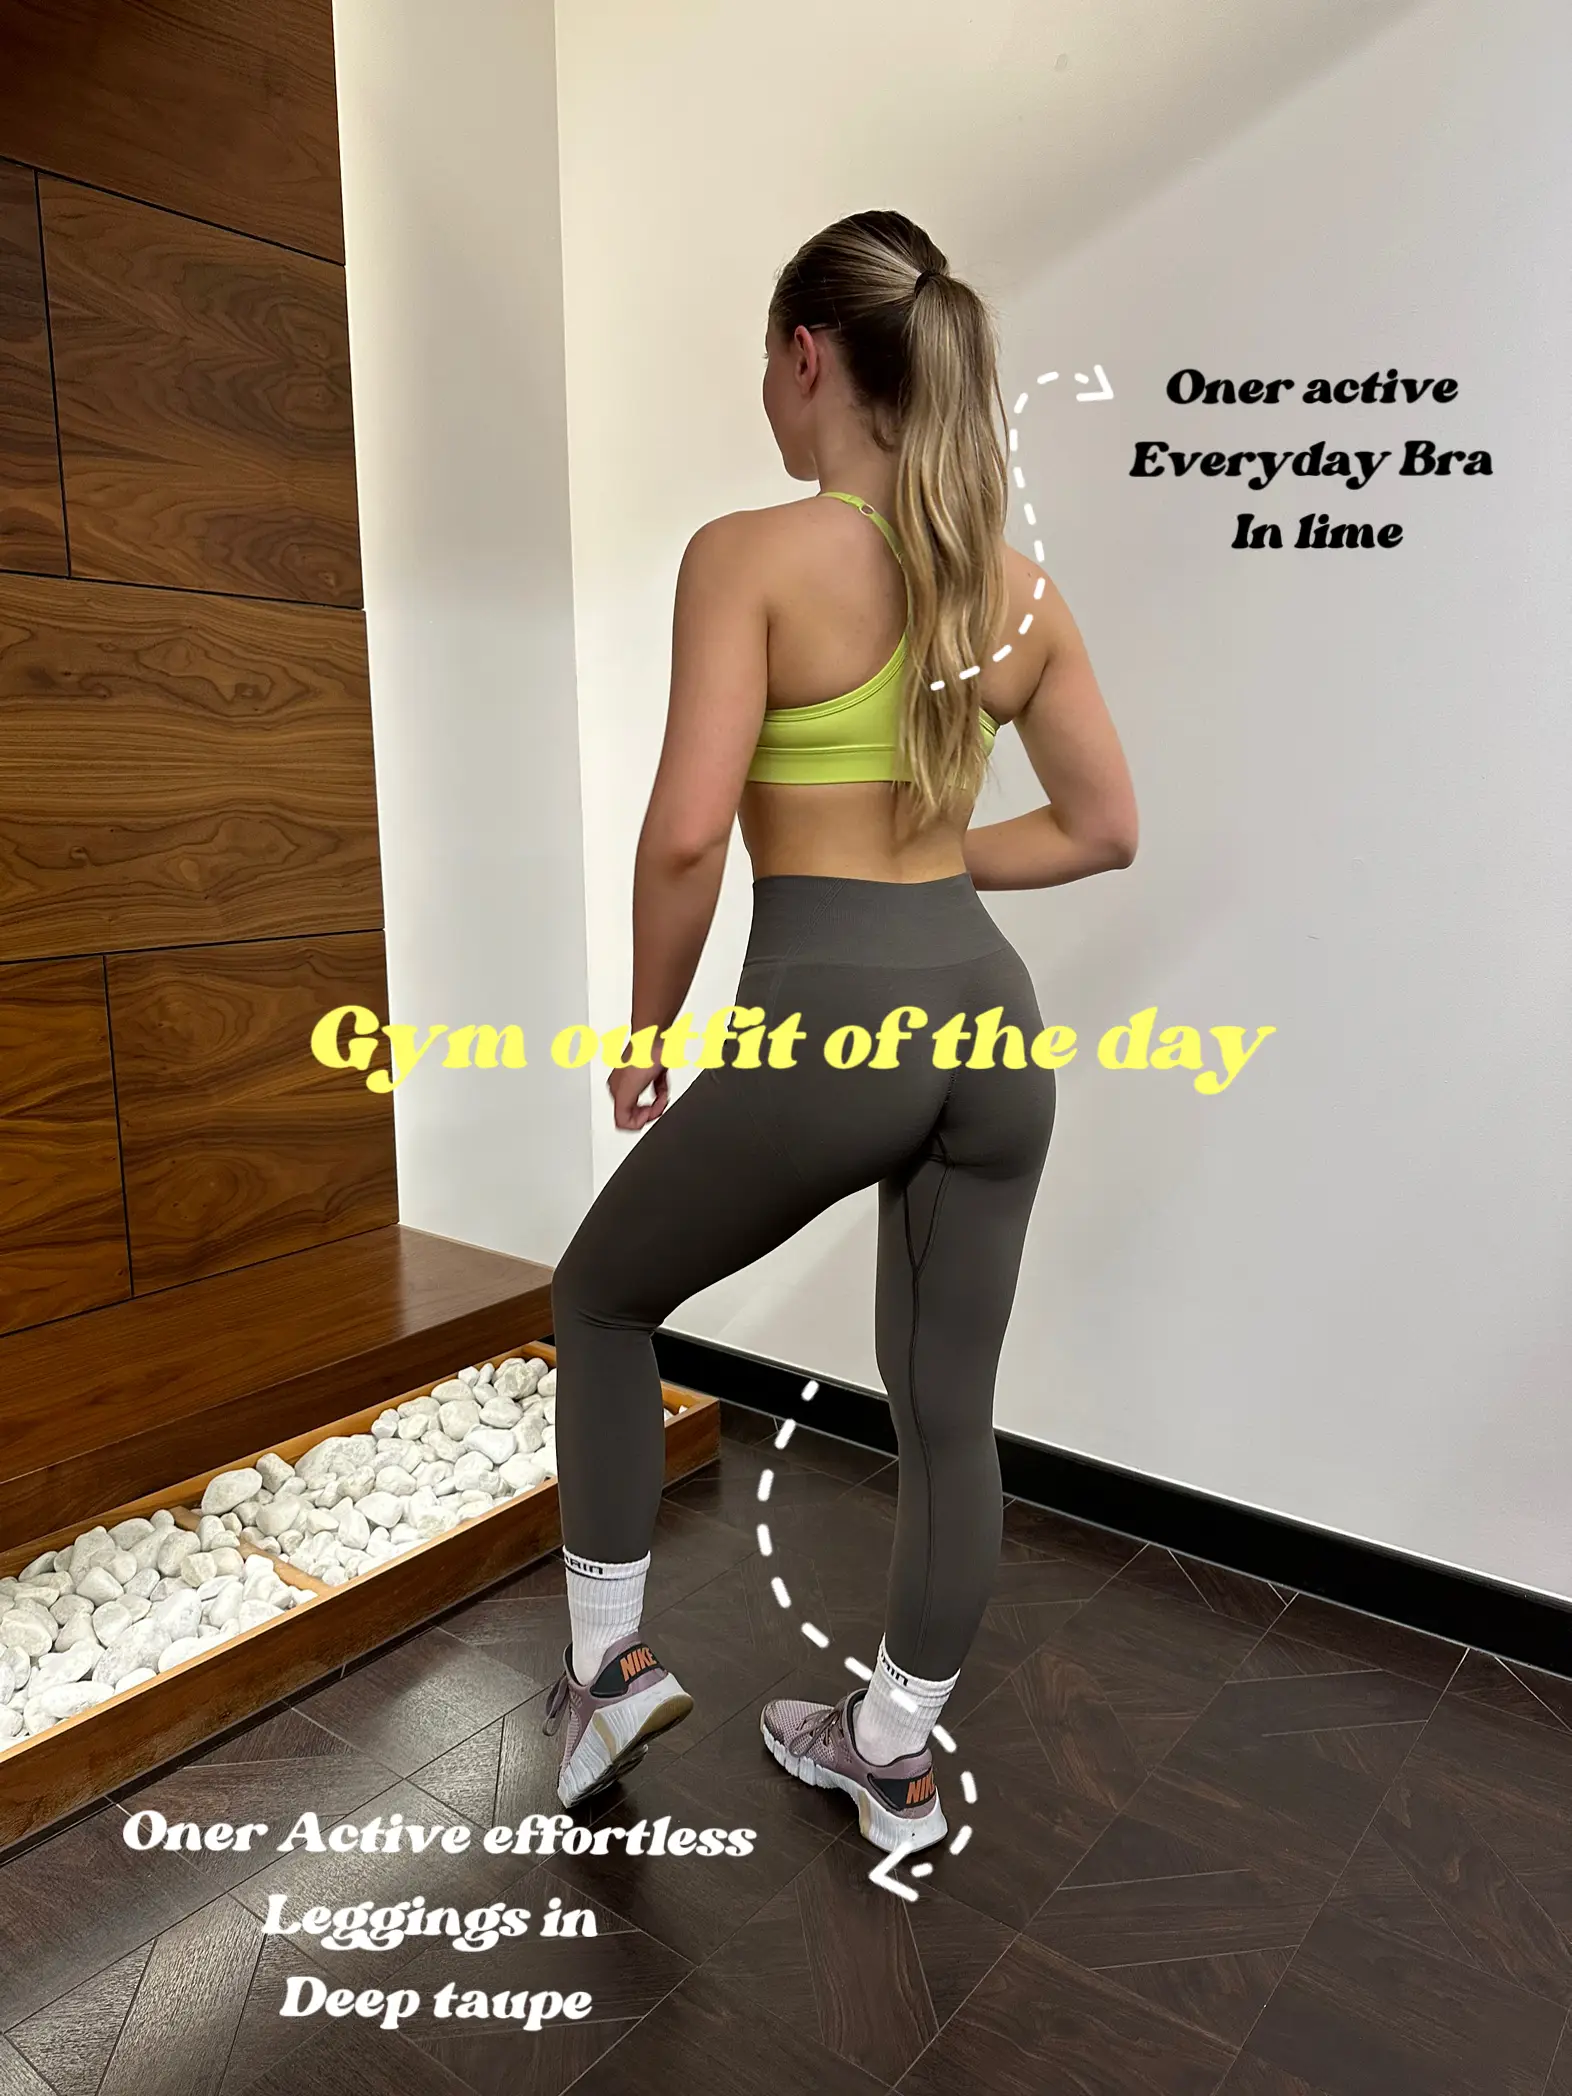 My review on the Oner Active Effortless Leggings! Have wanted to try t